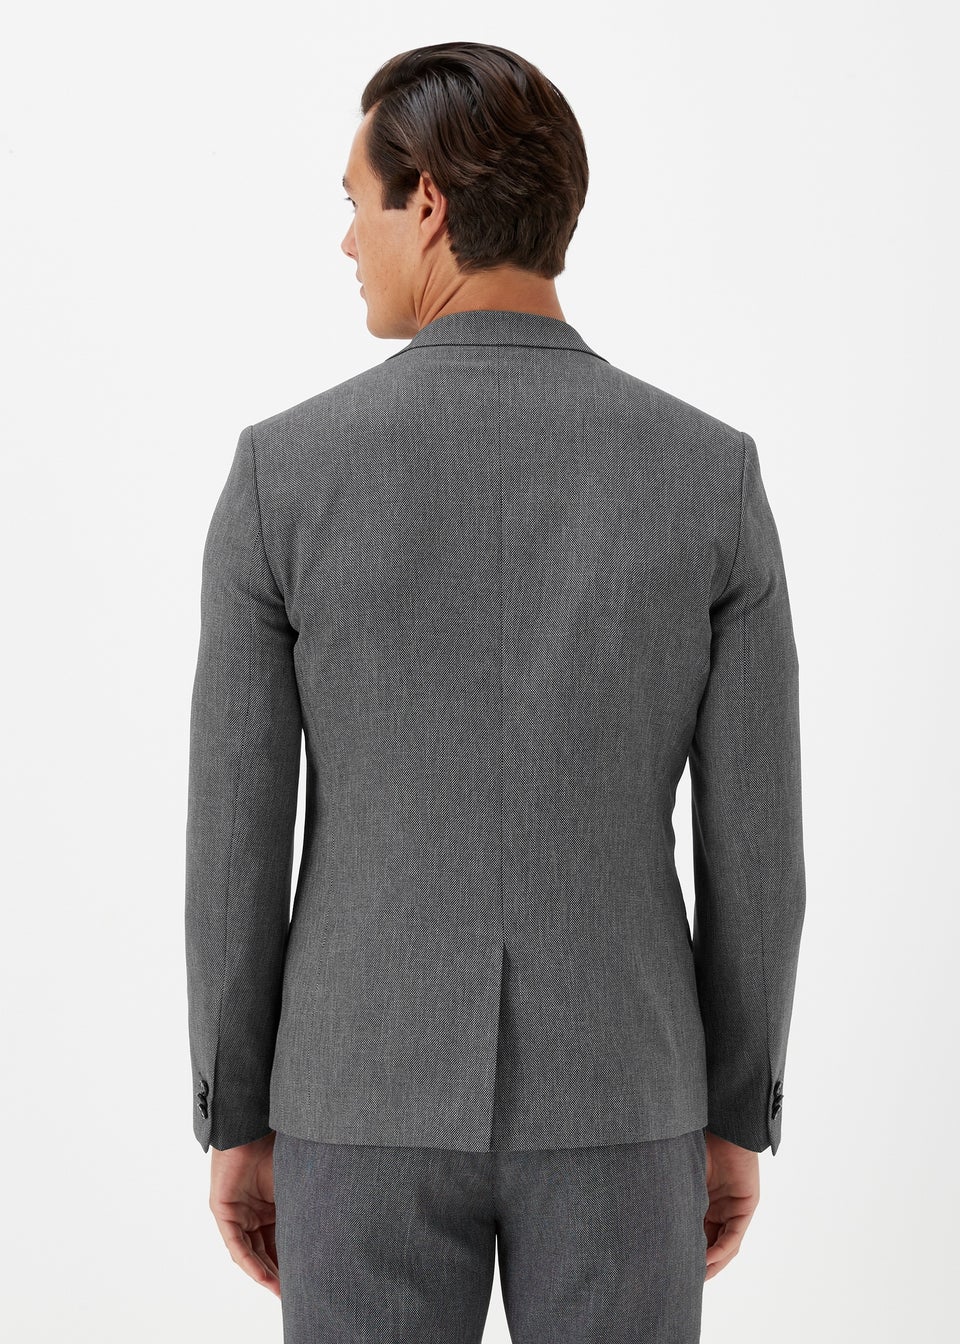 Taylor & Wright Albert Charcoal Skinny Fit Suit Jacket